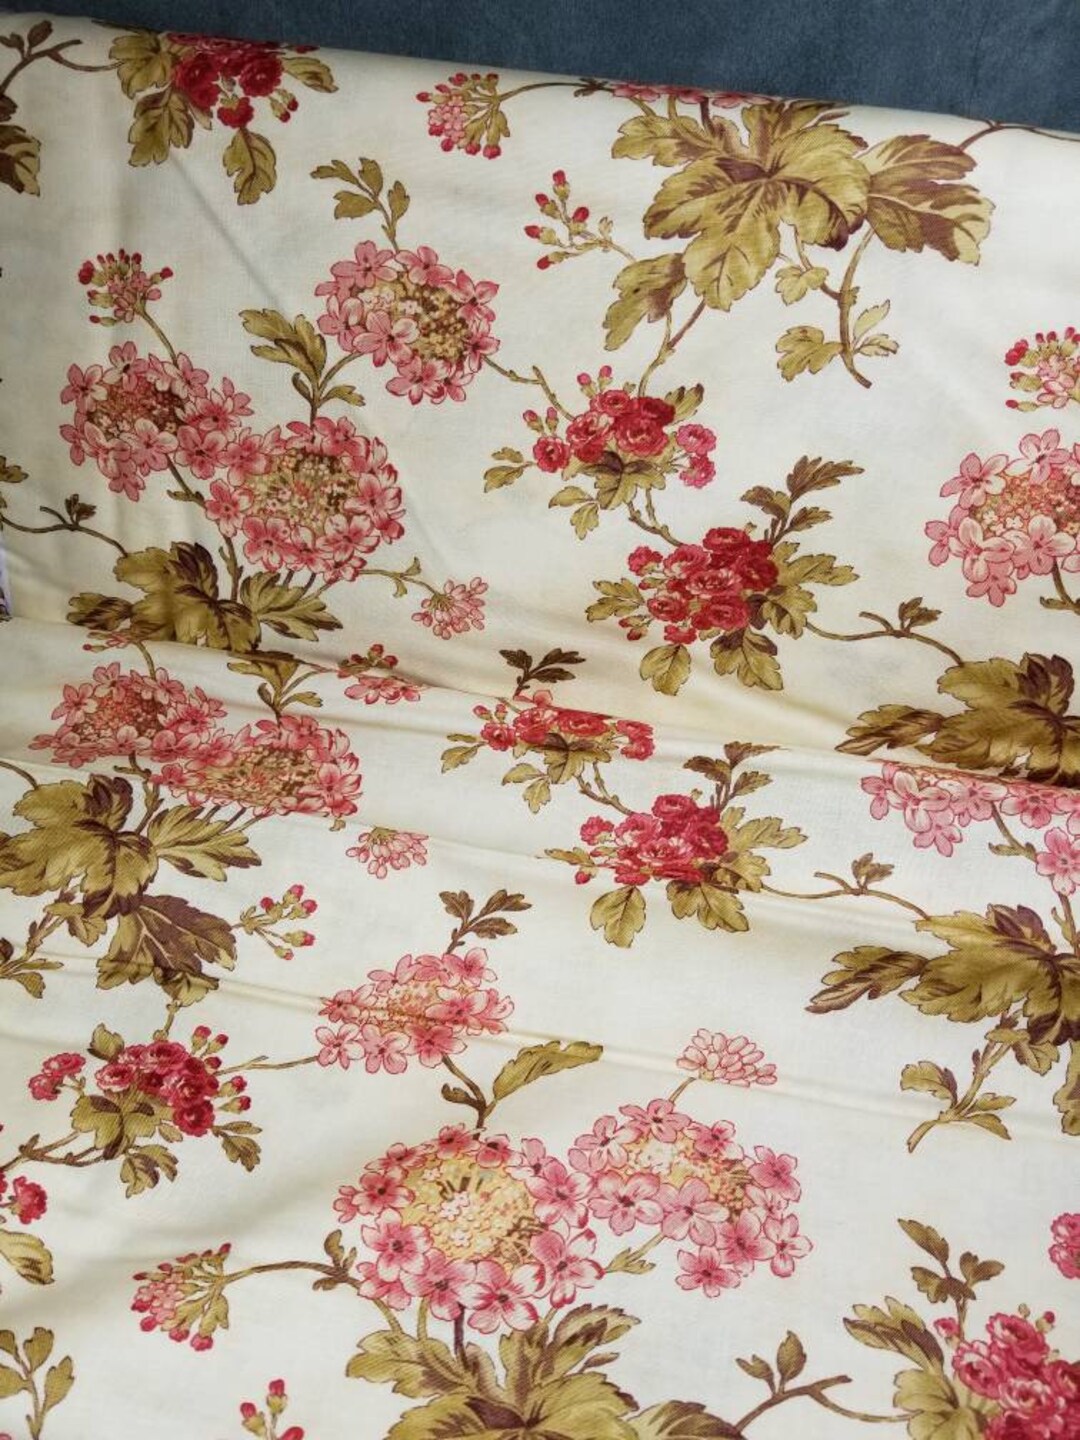 3 Sisters Vin Du Jour Cream Overall Floral Quilting Fabric - Etsy